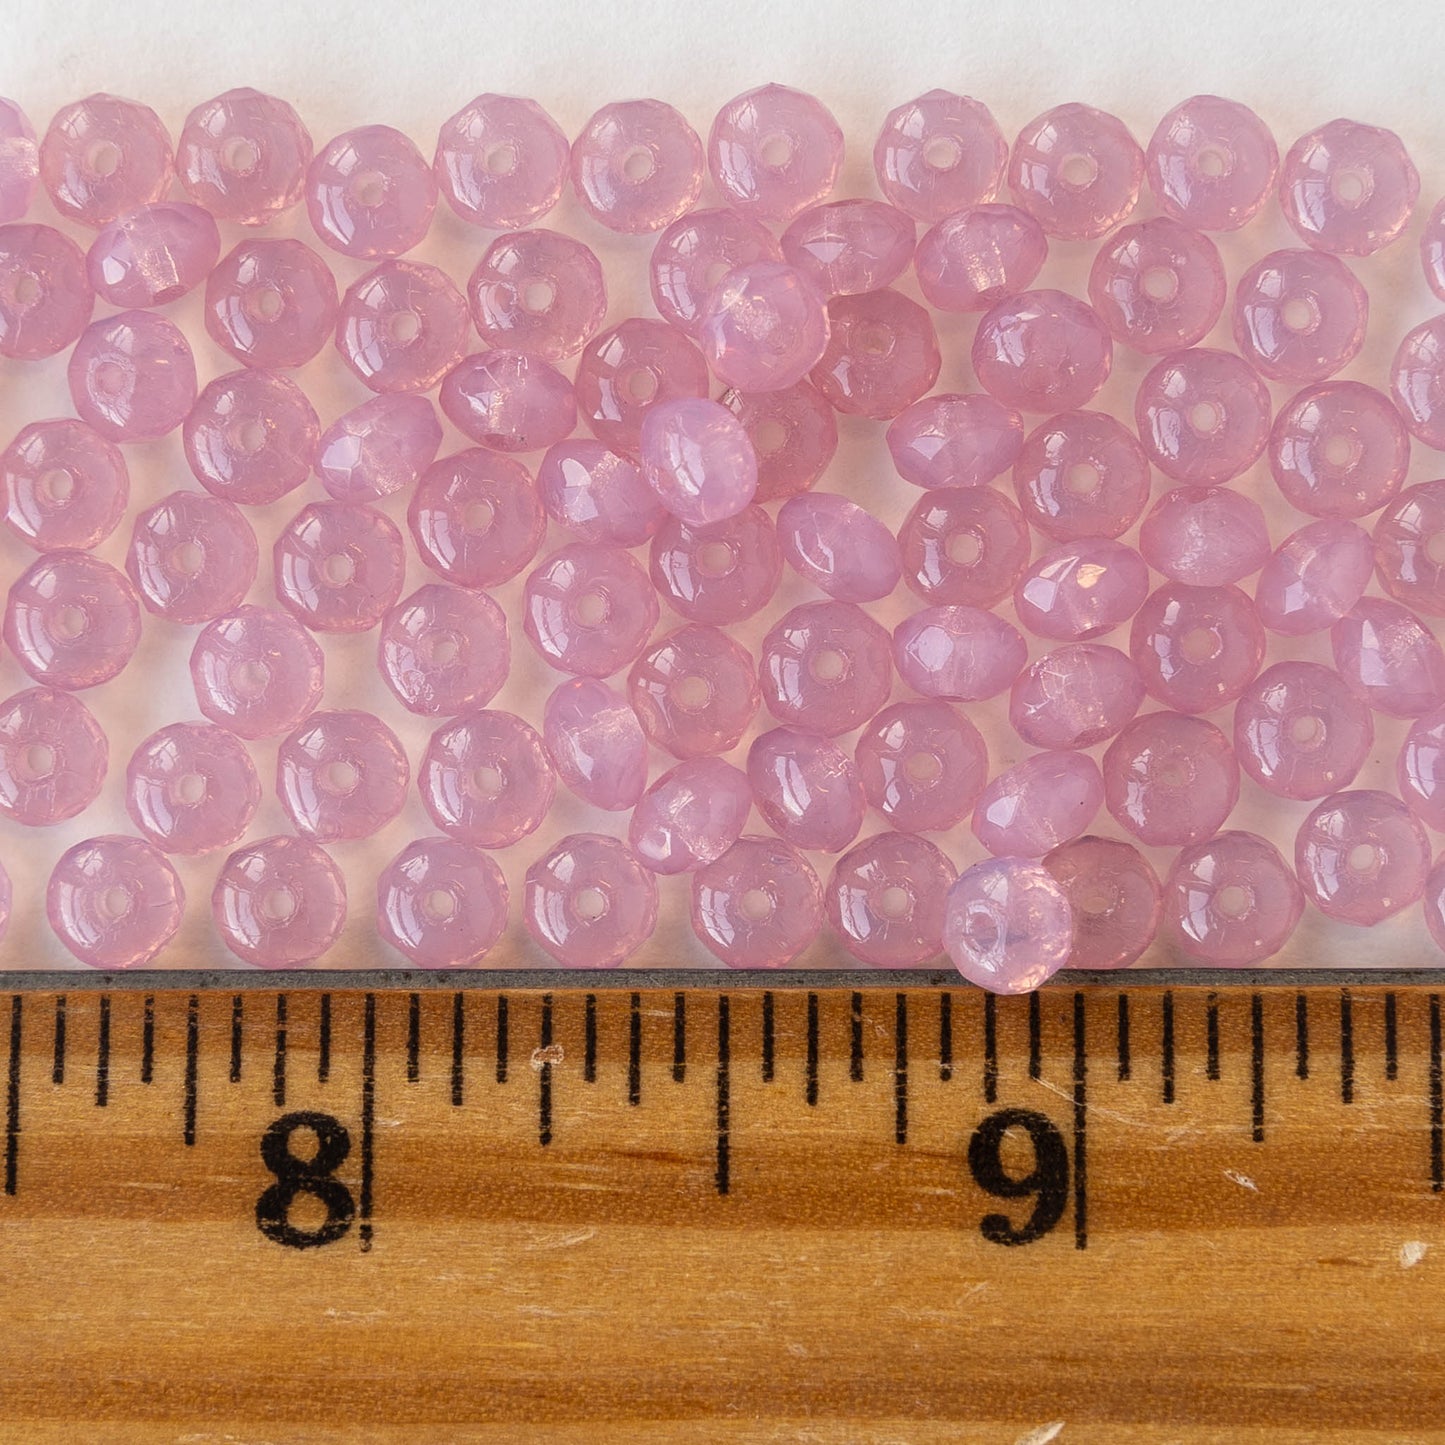 3x5mm Rondelle Beads - Pink Opaline - 30 Beads